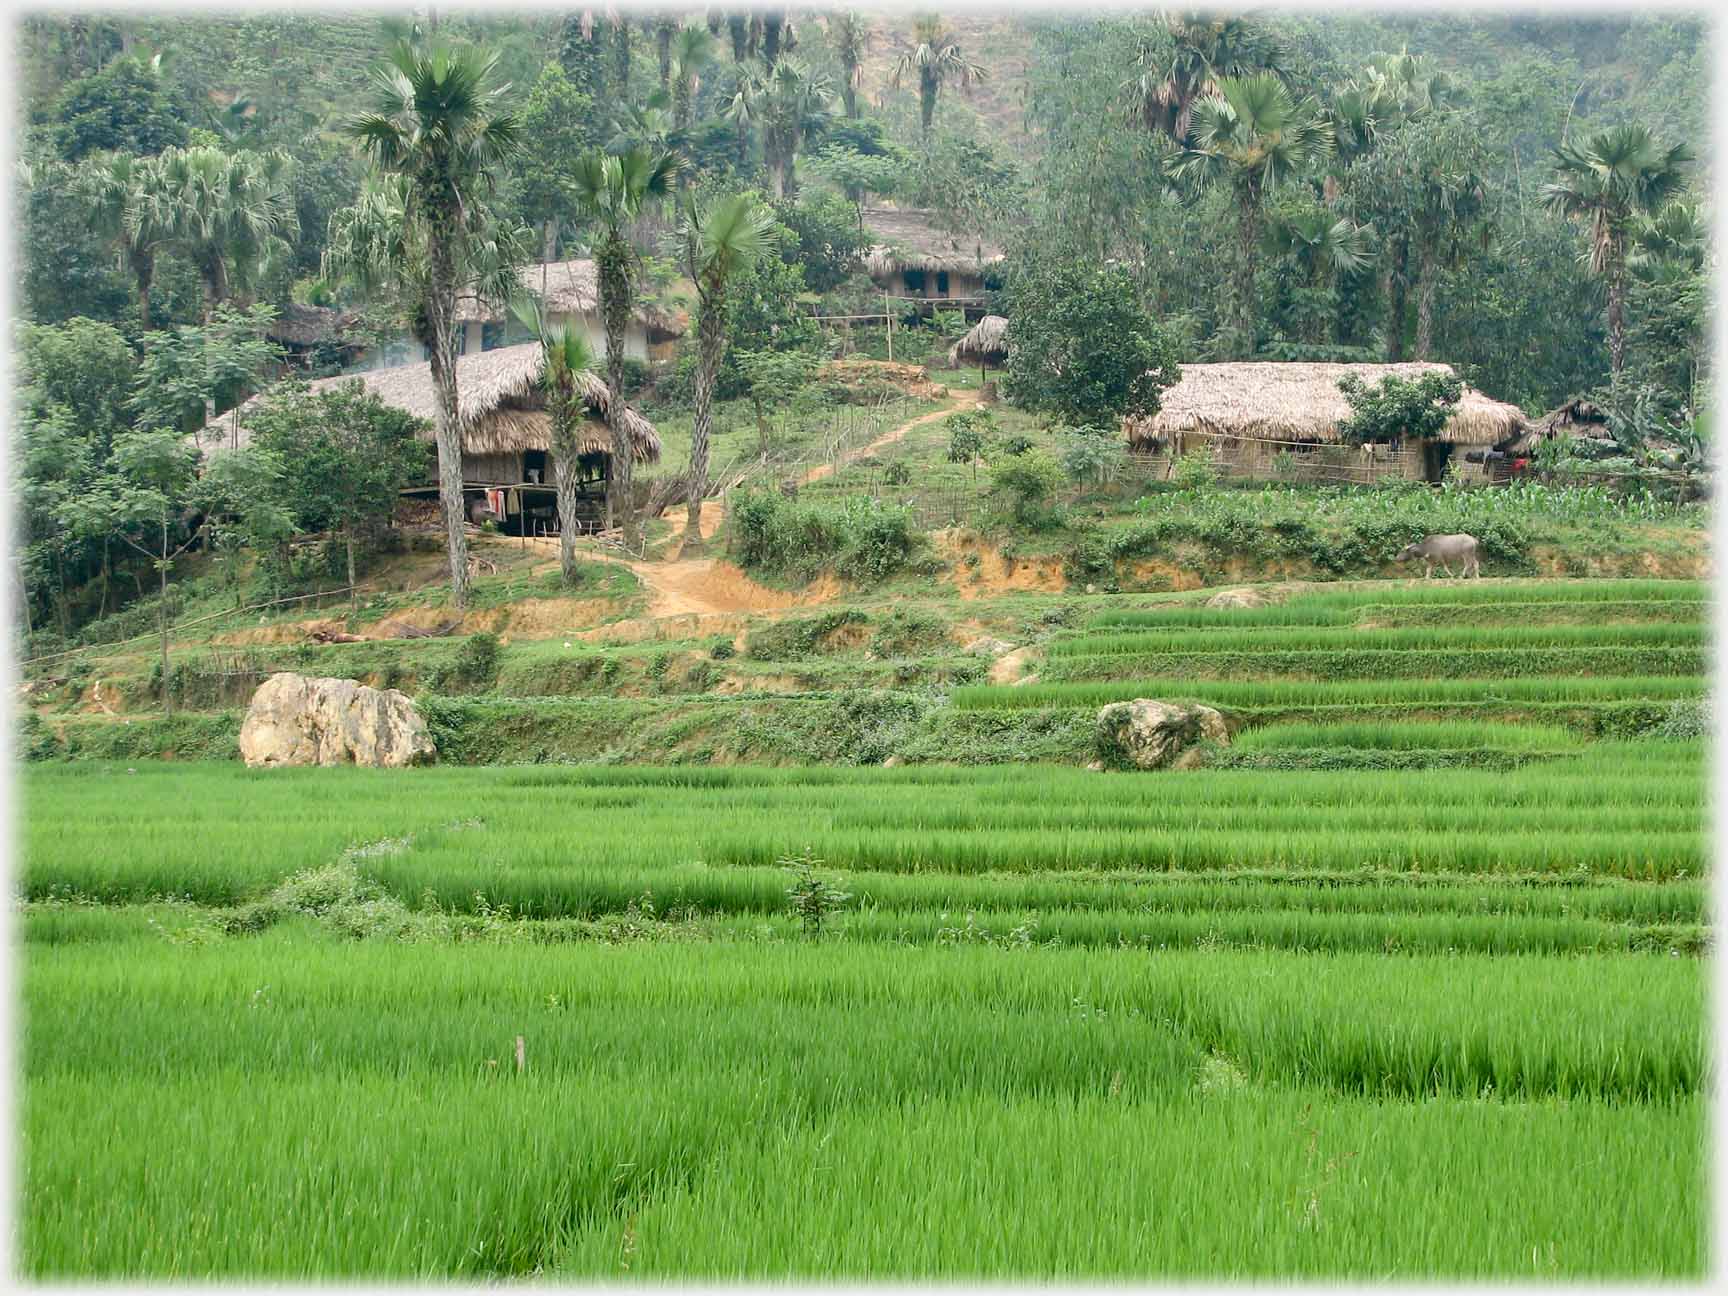 Well grown paddy fields with village beyond.